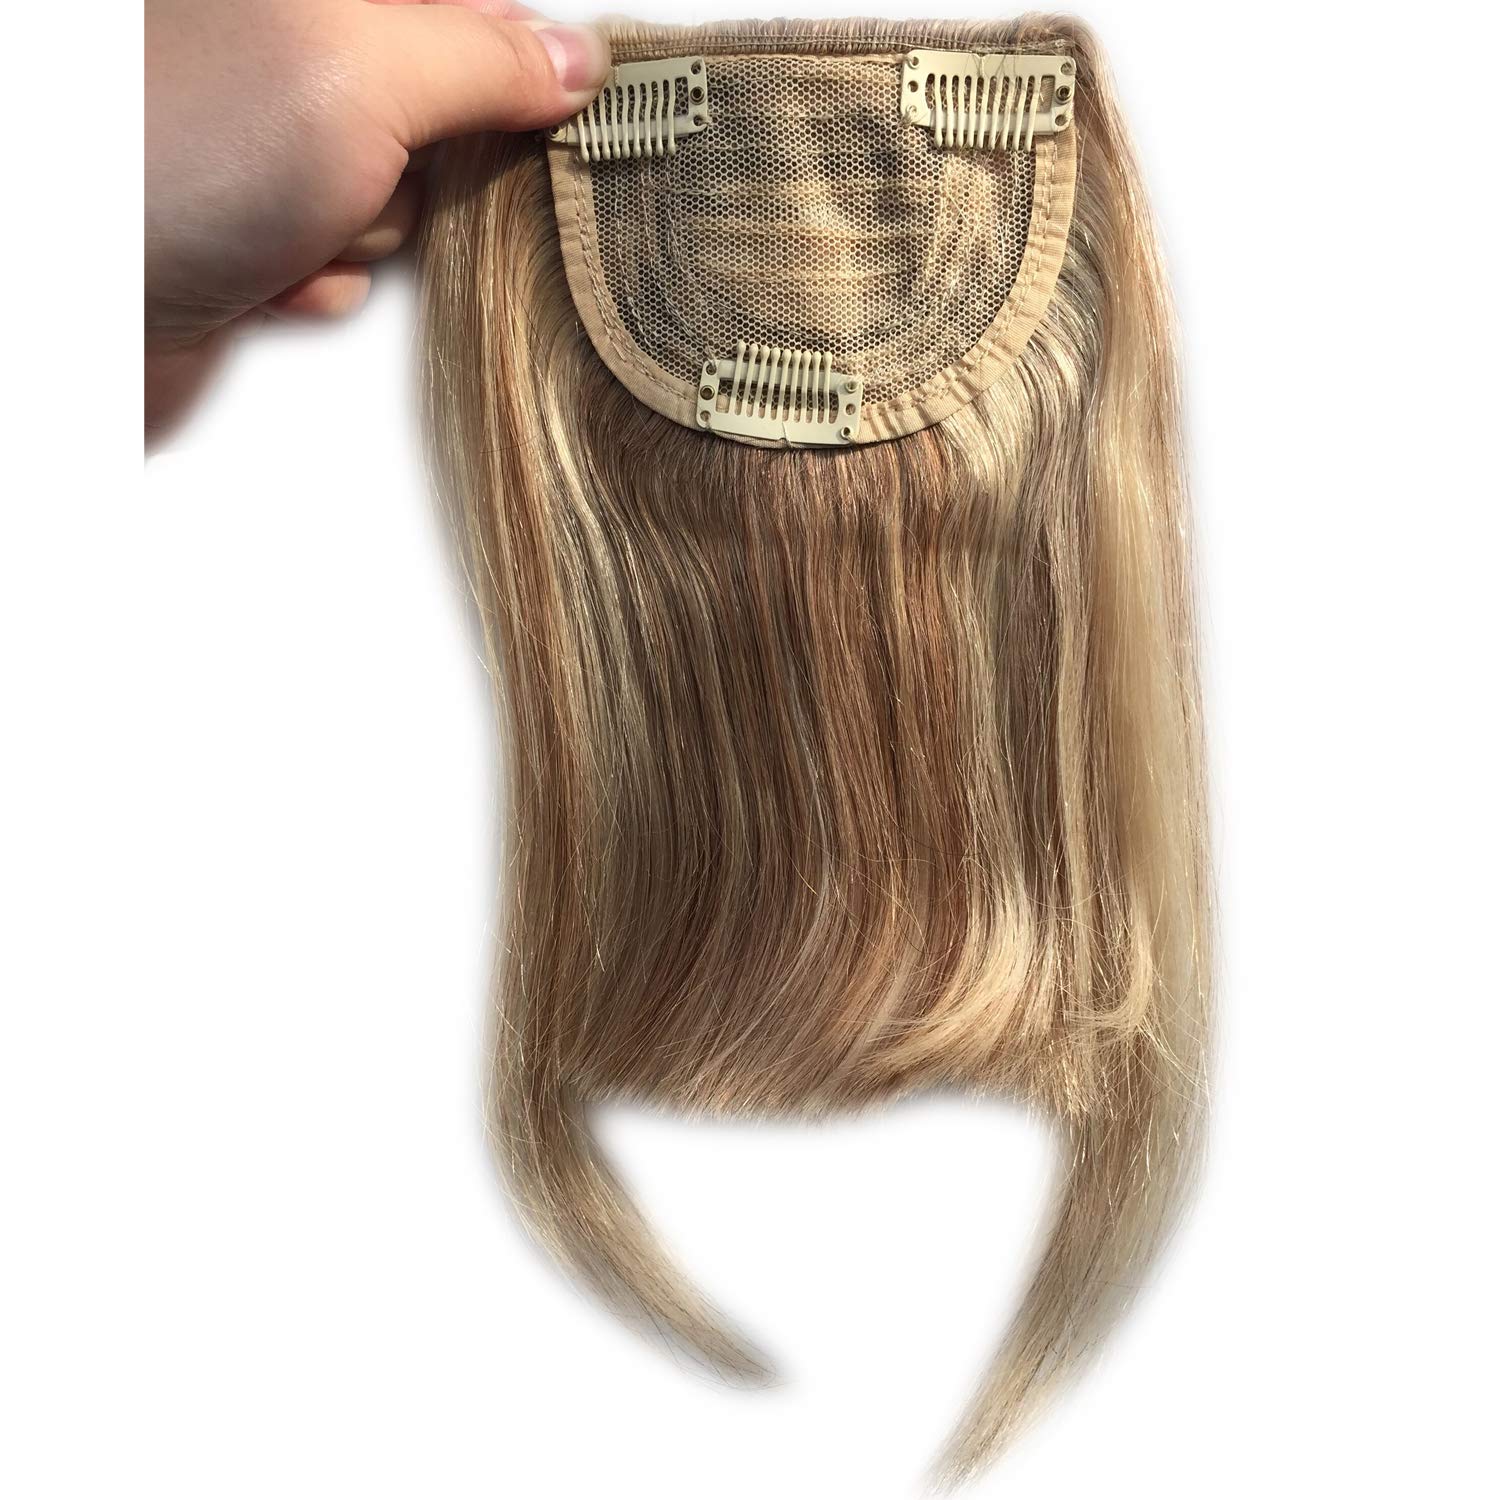 27P613 Blonde Mixed Brown Color Brazilian Human Hair Clip-in Hair Bangs Full Fringe Short Straight Hair Extension for women 6-8"